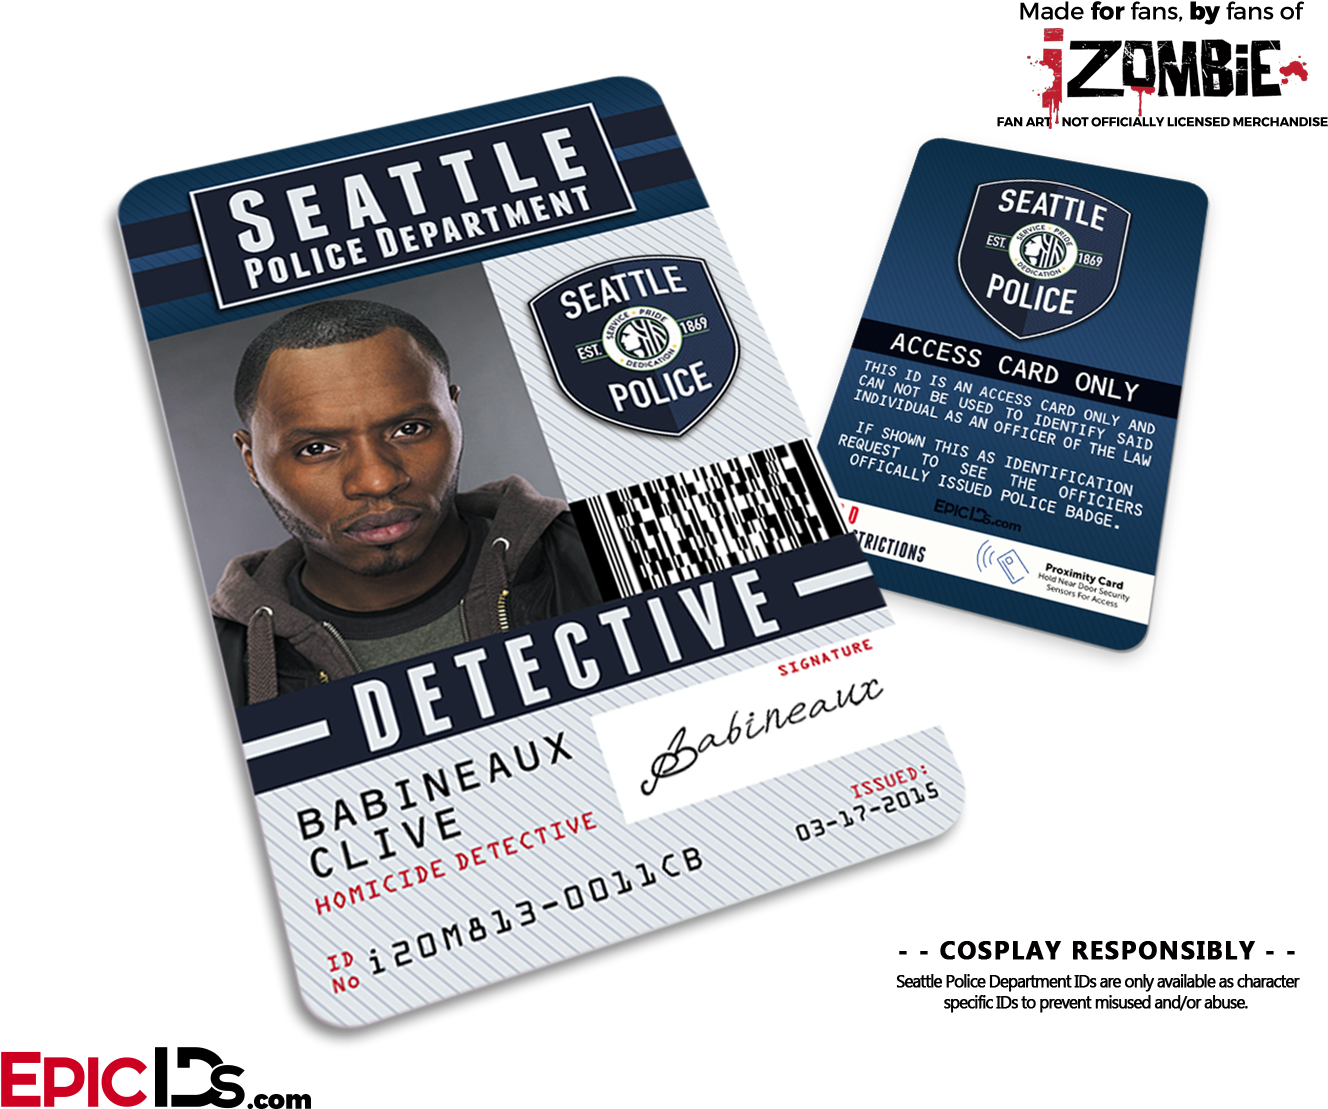 Seattle Police Department 'izombie' Homicide Detective - Police Department Id Cards (1417x1181)